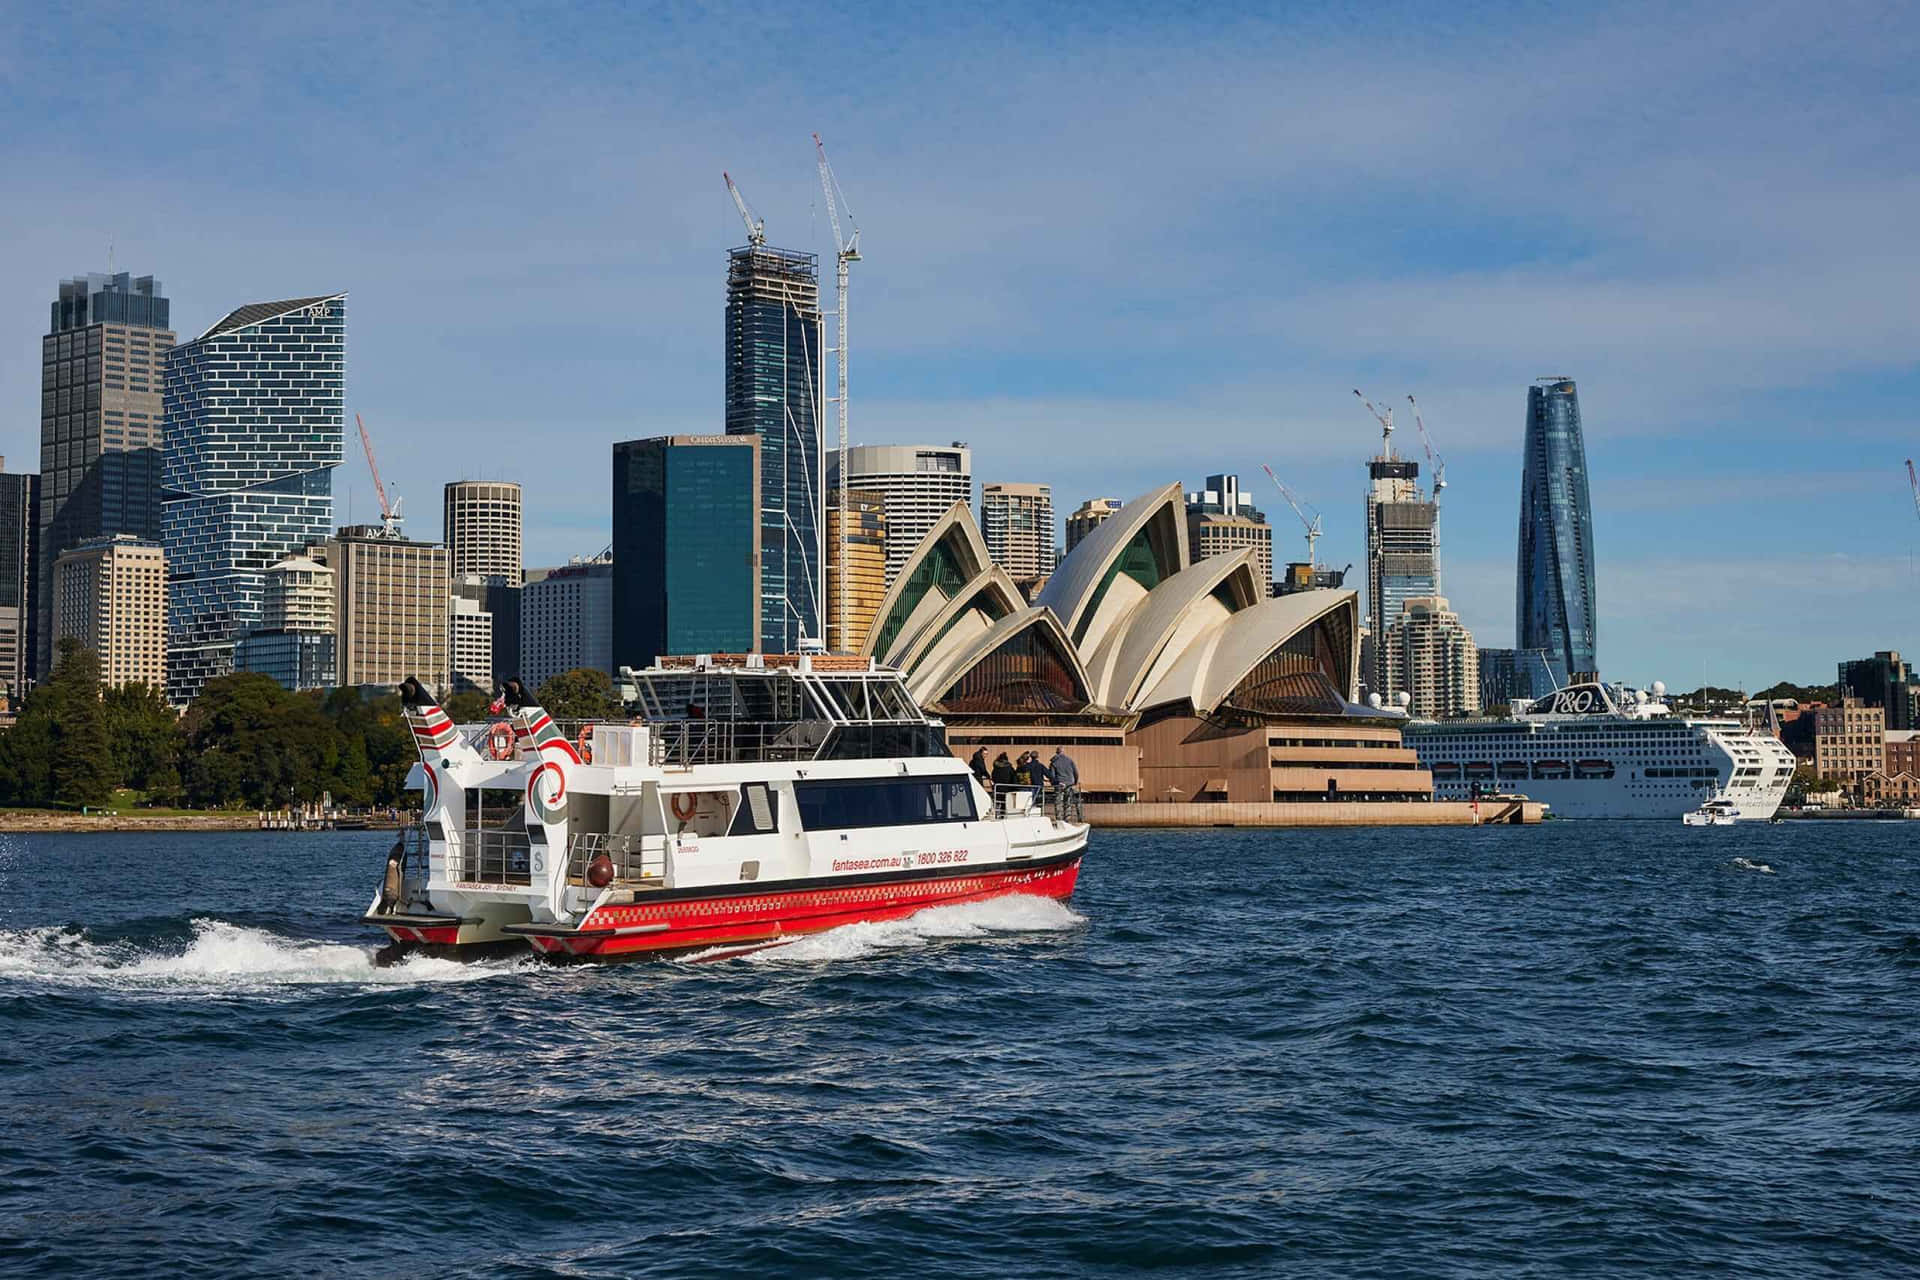 Sydney Harbour Cruisewith Opera House View Wallpaper